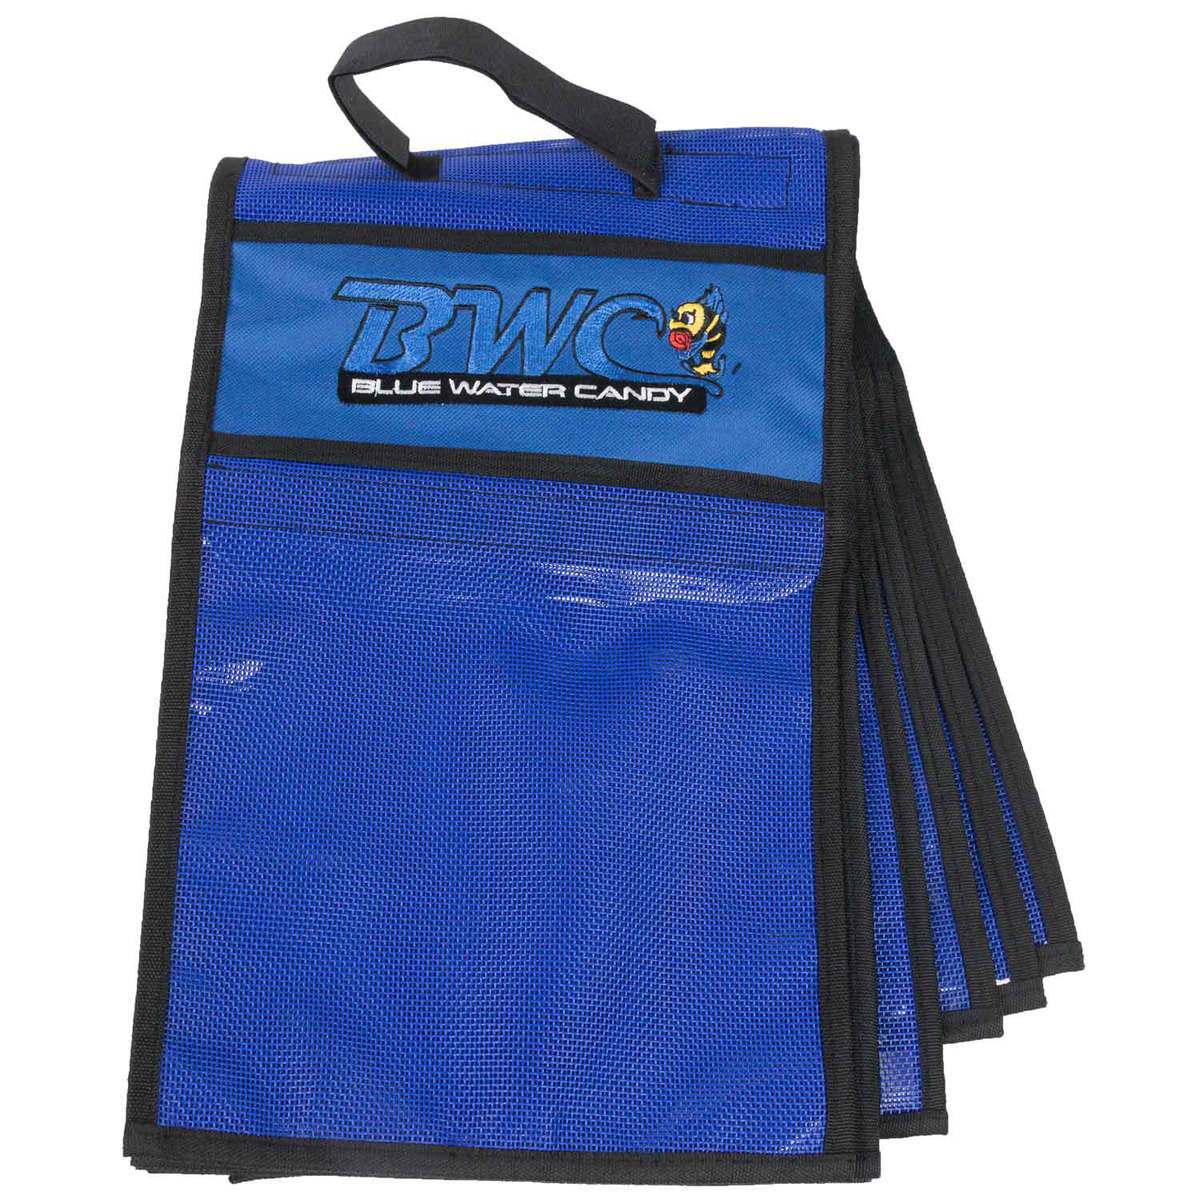 Blue Water Candy Rig Bag Tackle Wrap | Sportsman's Warehouse